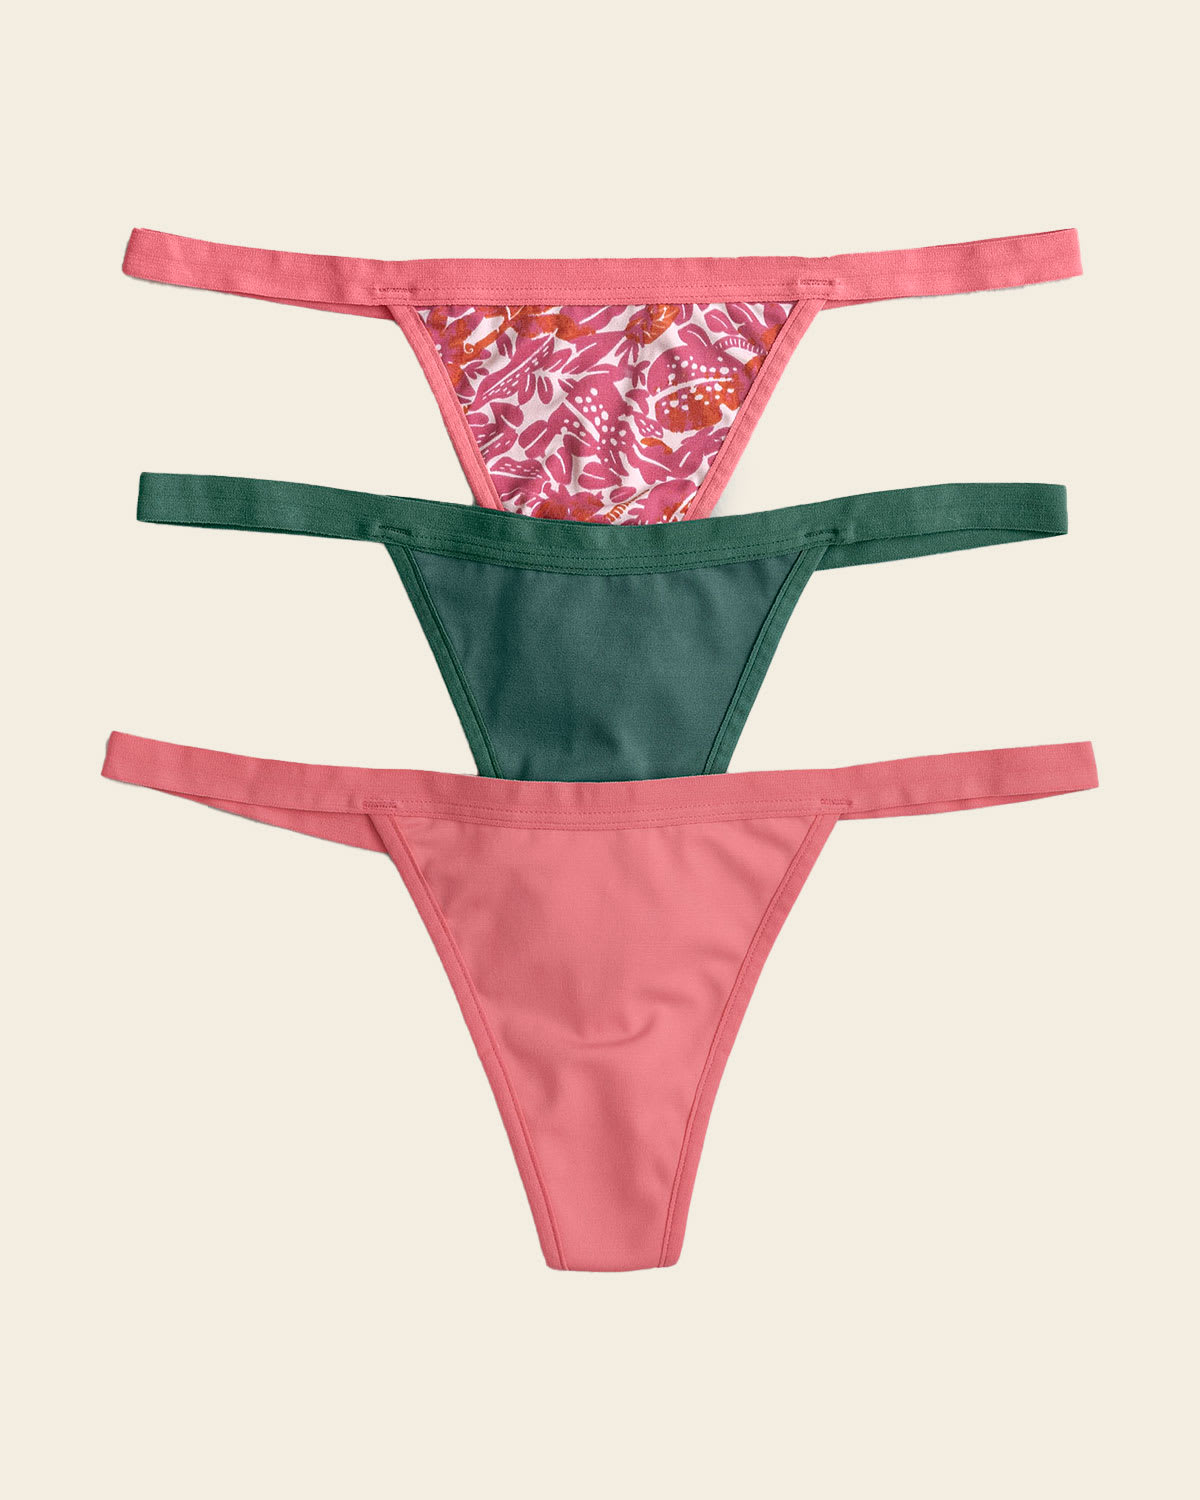 NEW VICTORIA'S SECRET PINK SEAMLESS THONG PANTY PINK CHRISTMAS